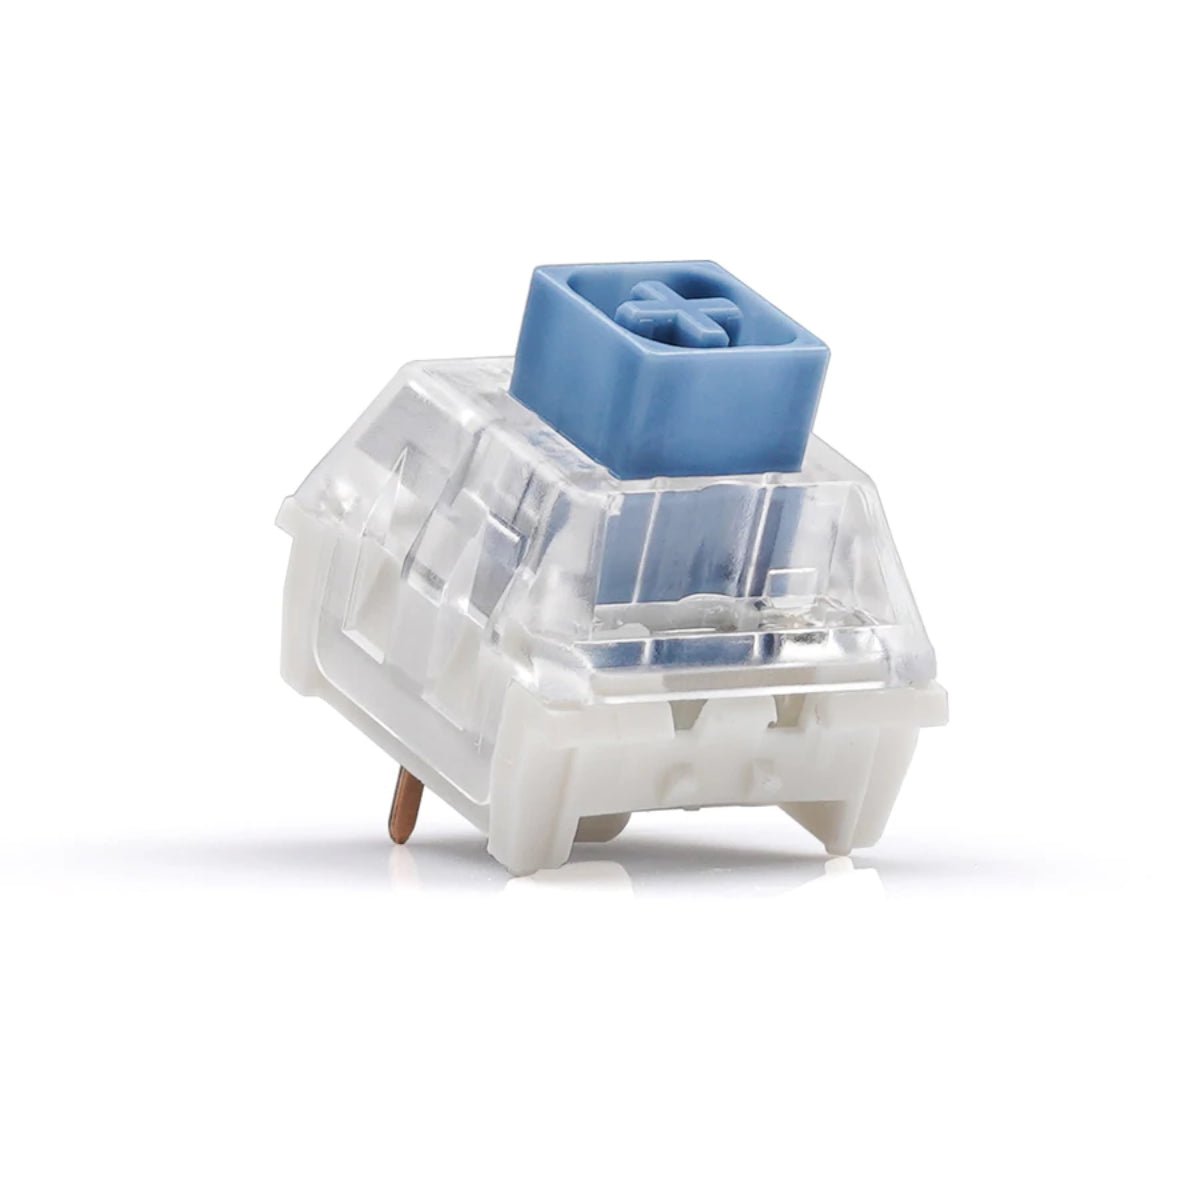 KBD Fans NovelKeys X Kailh Box Heavy Switches - Pale Blue - Store 974 | ستور ٩٧٤